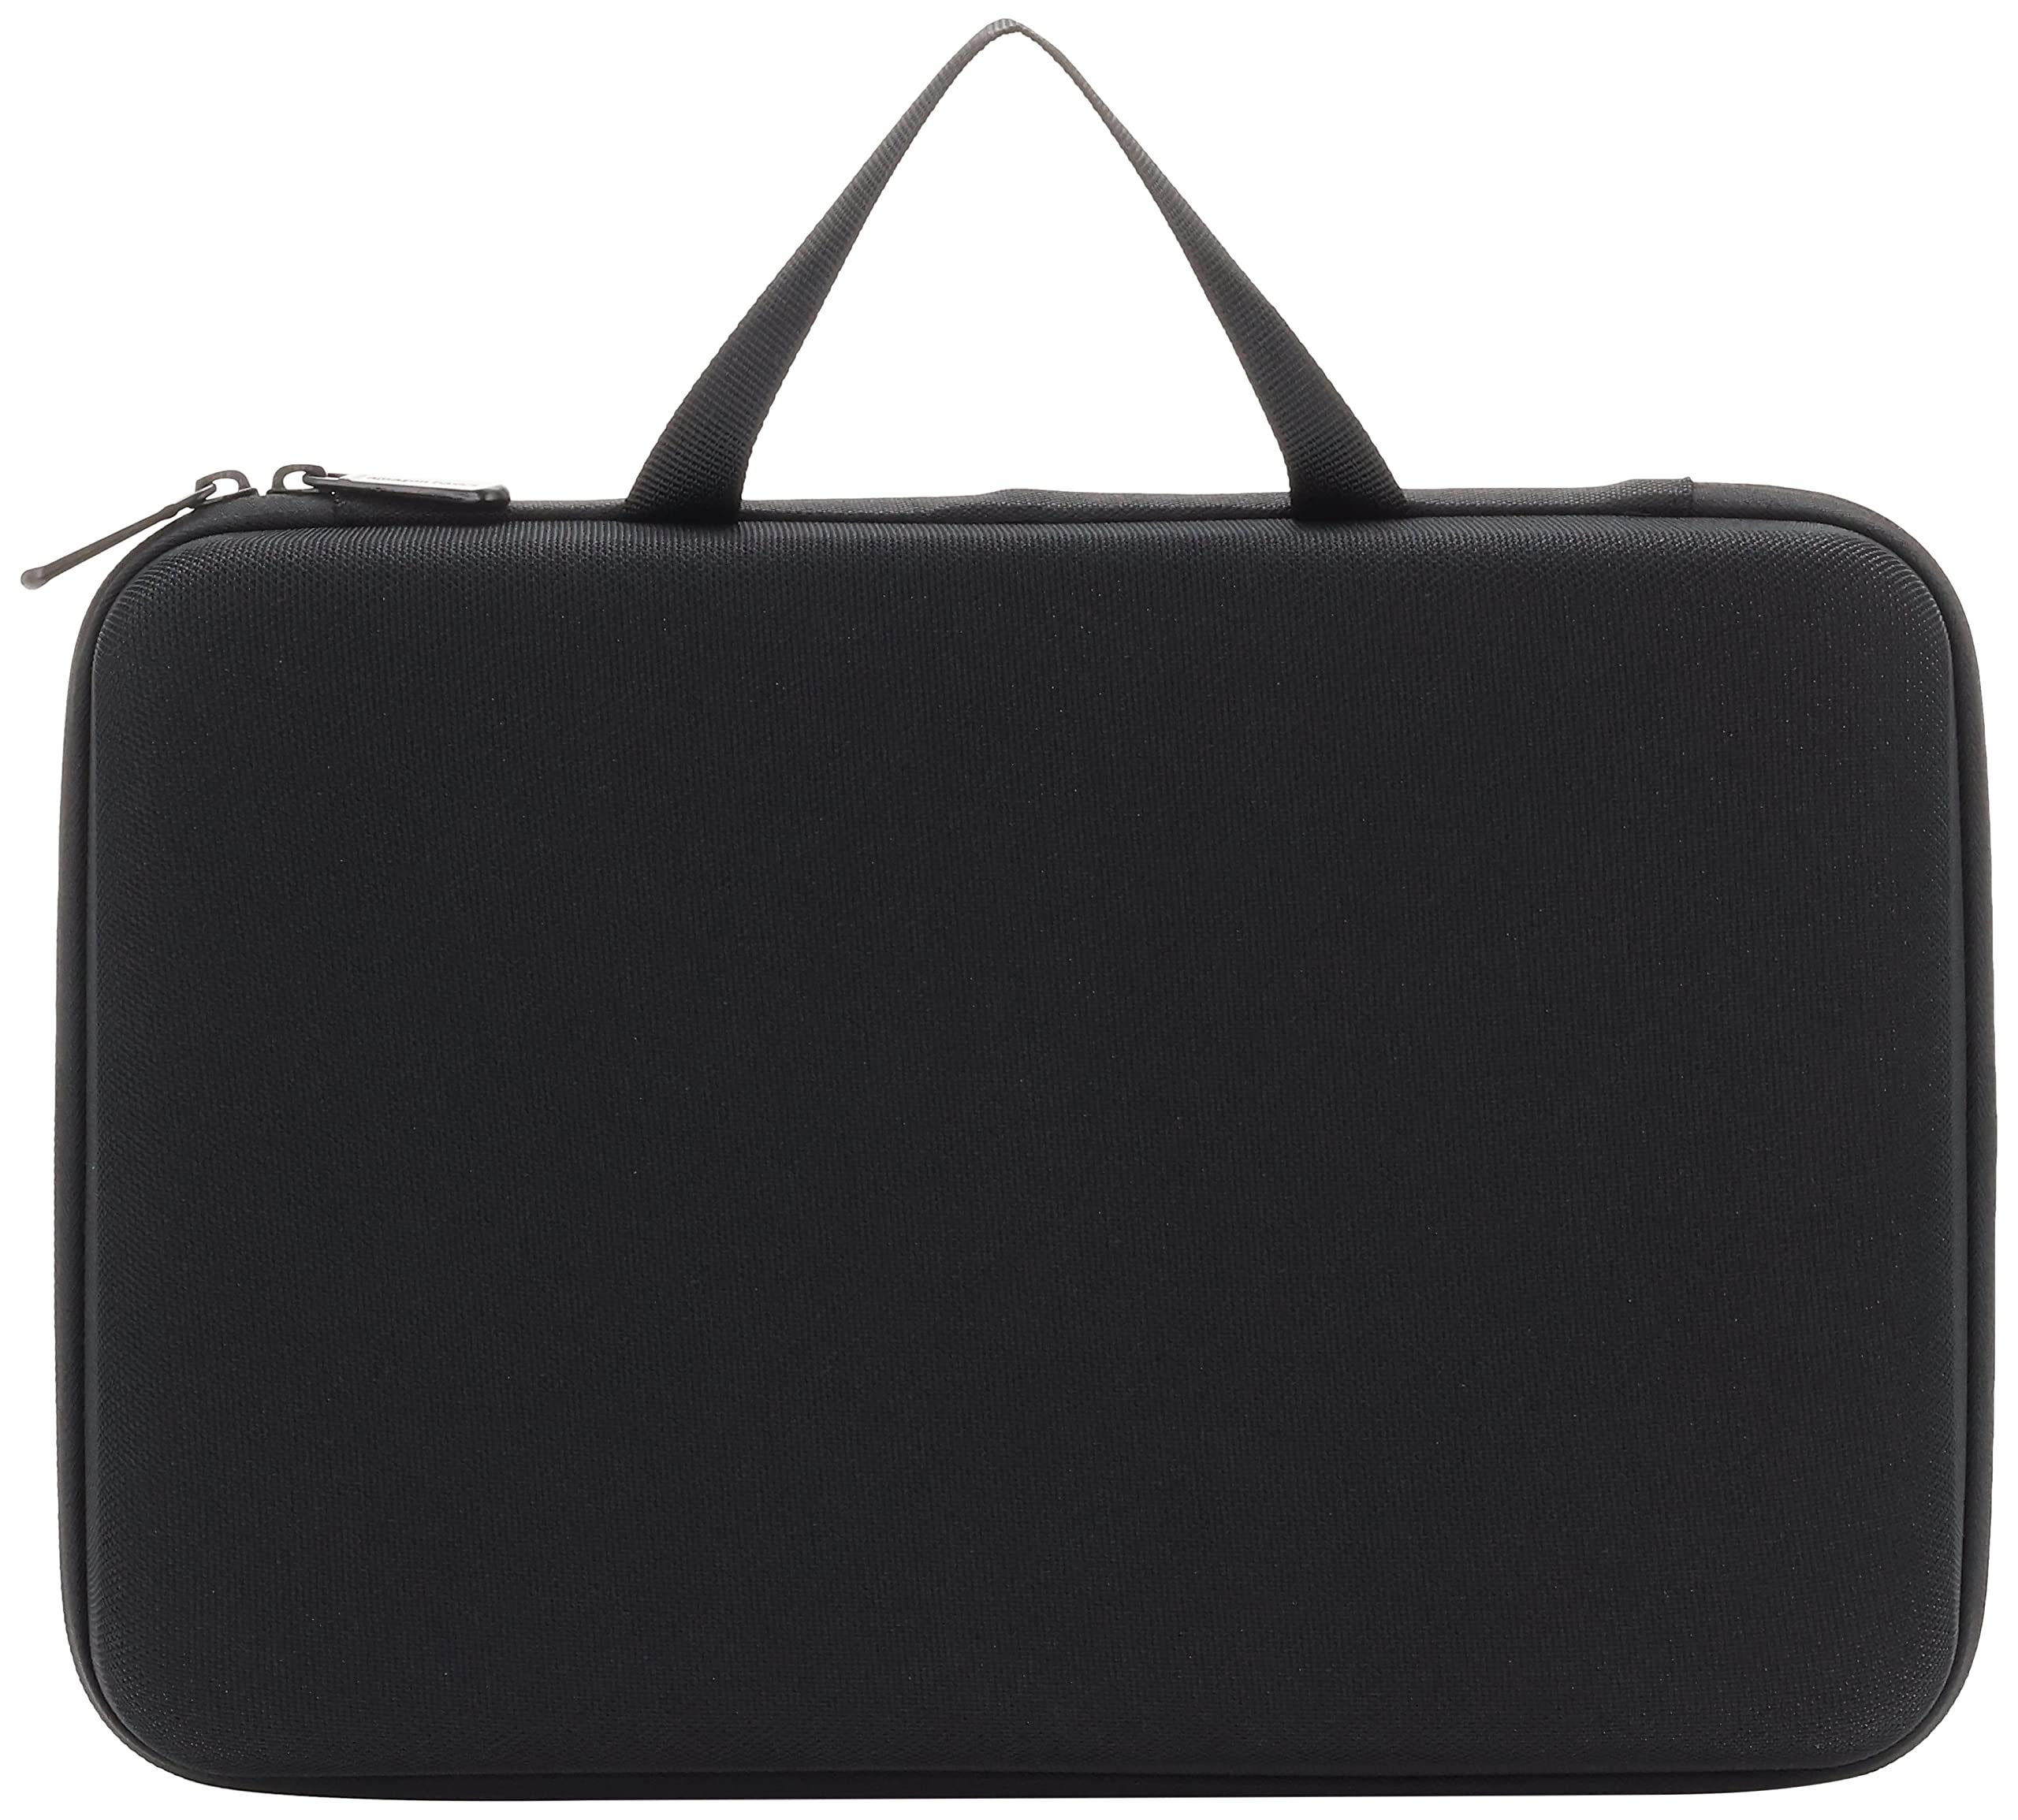 Amazon Basics Large Carrying Case for GoPro And Accessories, 13 x 9 x 2.5 Inches, Black, Solid